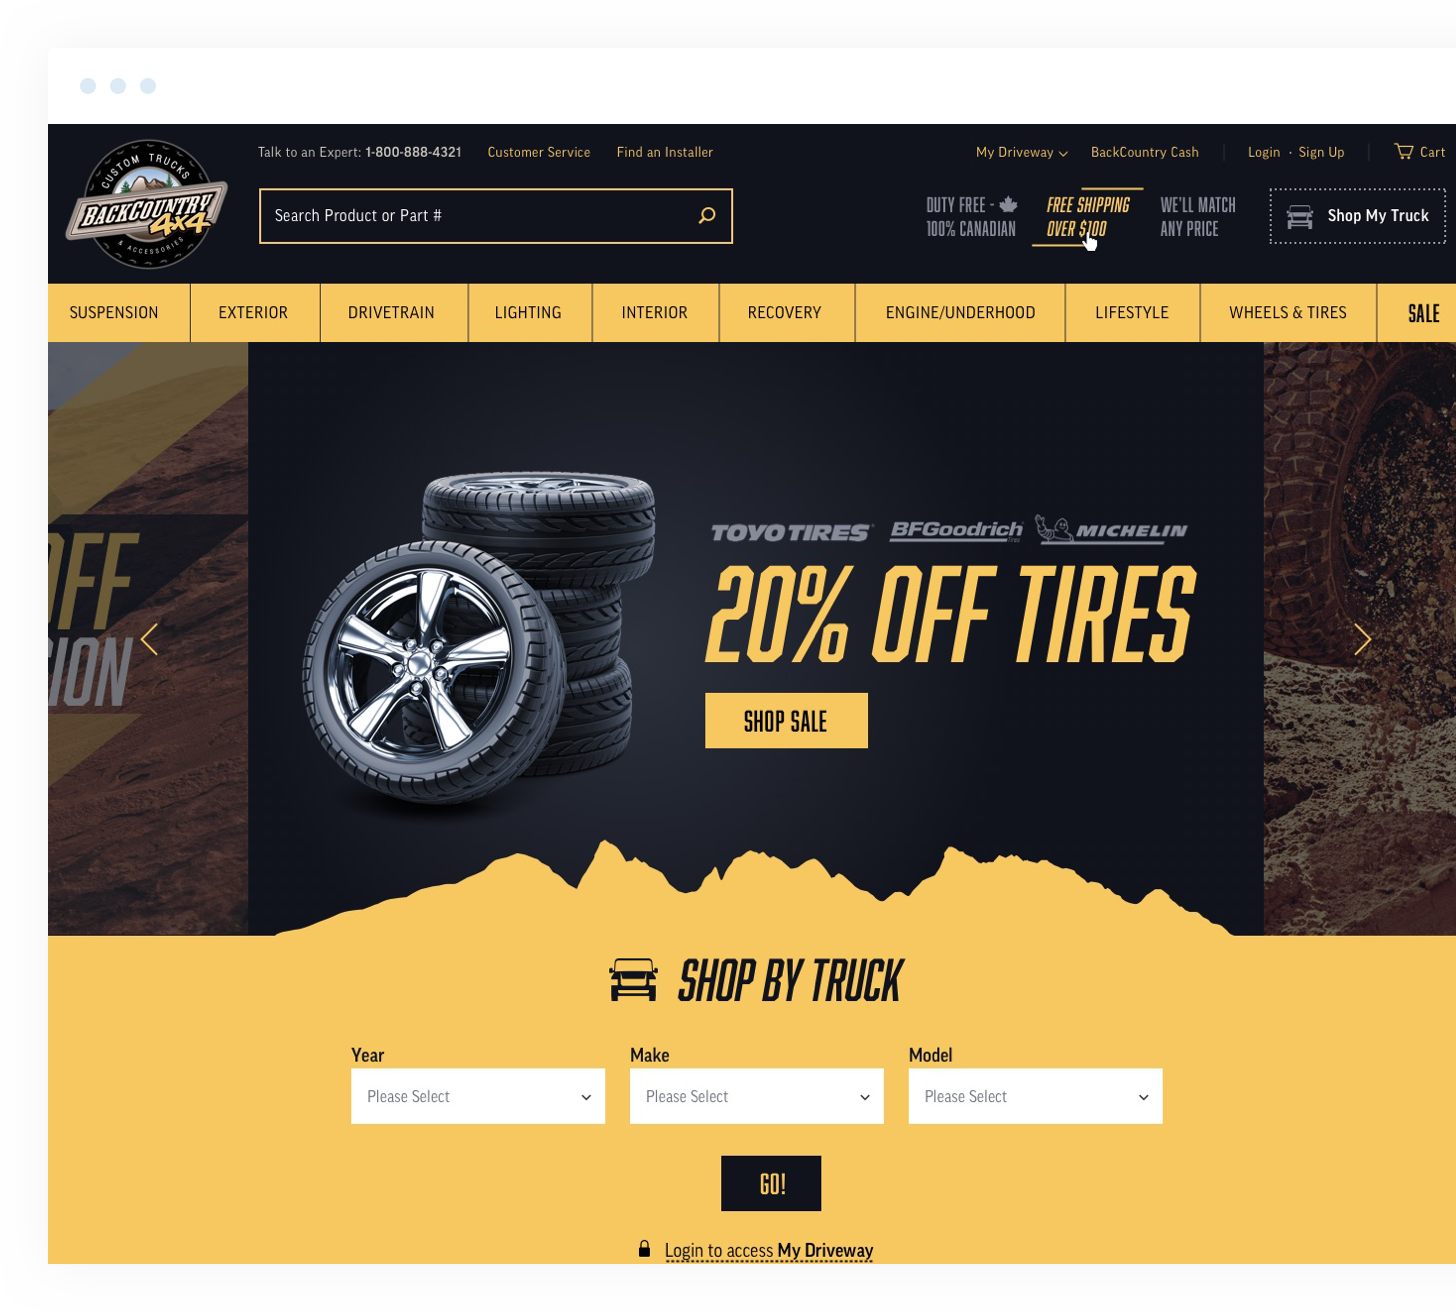 Back Country main page loaded, with the 20% off tires promo visible